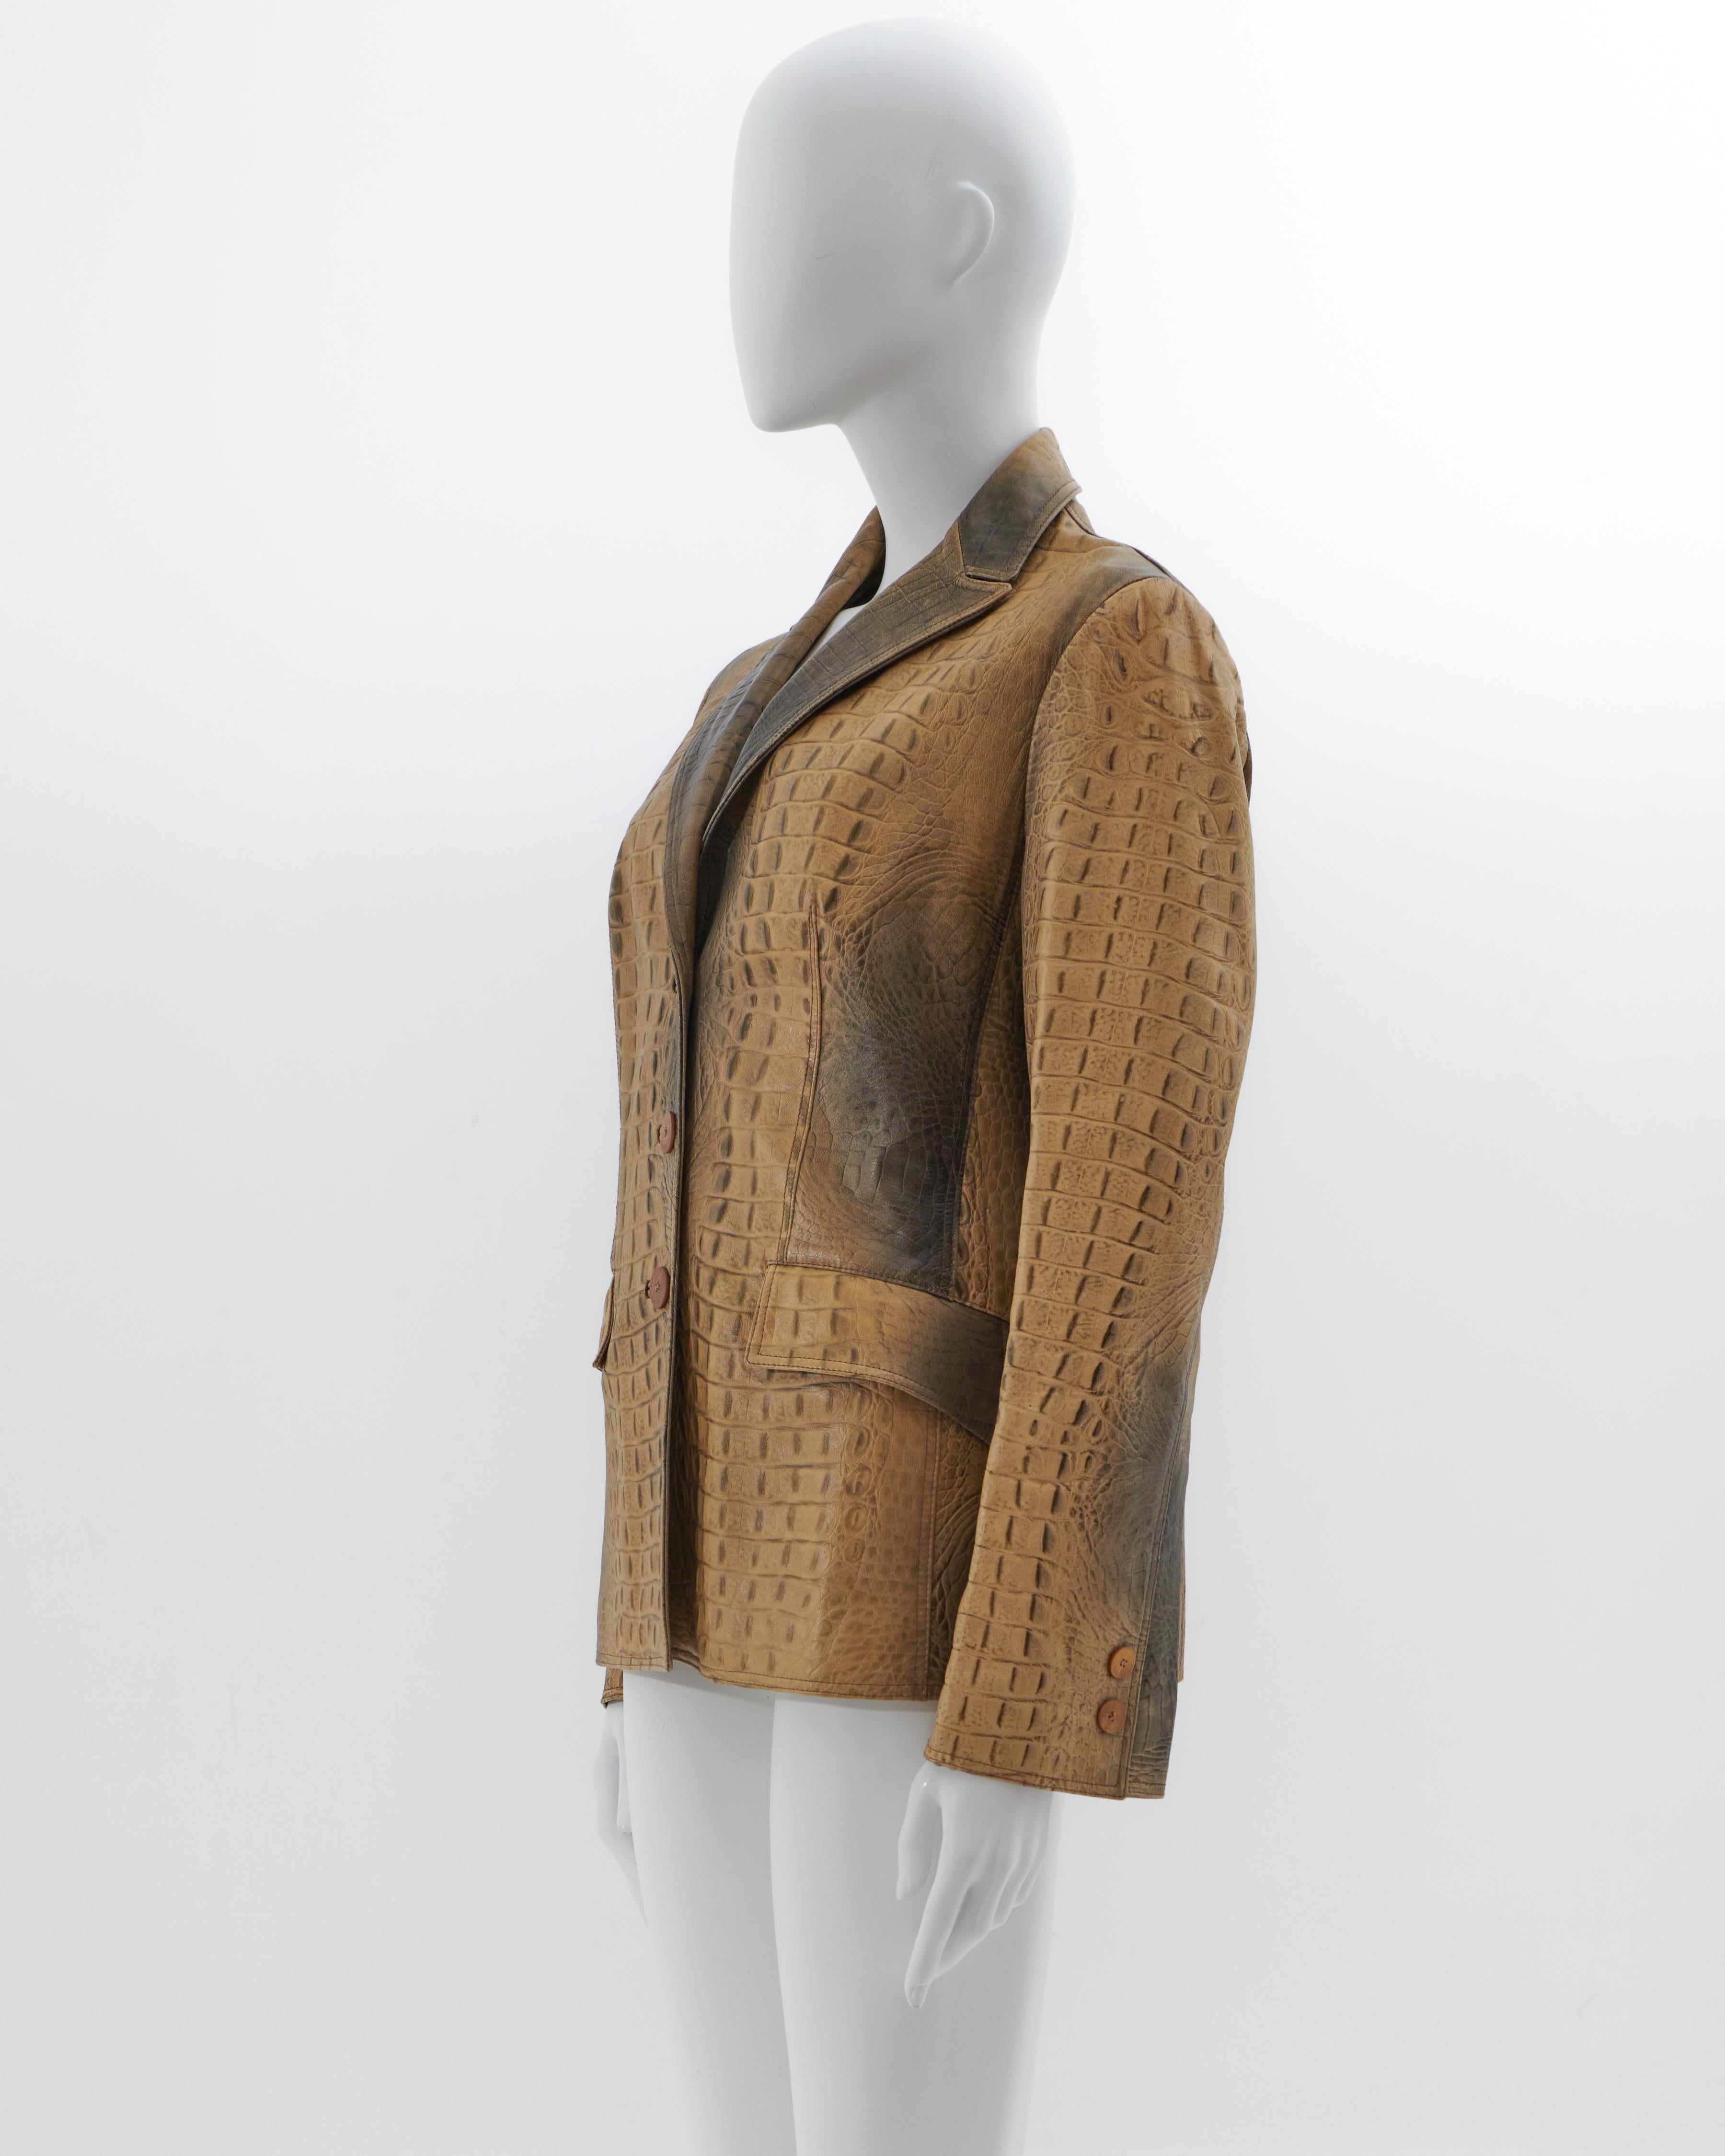 - Roberto Cavalli beige croc-embossed leather jacket
- Sold by Skof.Archive
- Fitted to the body 
- Frontal button closure 
- Fall-Winter 2000
- Made in Italy

Condition: Excellent

Size: FR 38 - IT 42 - UK 10 - US 8 (EU)

Composition: 100% Leather